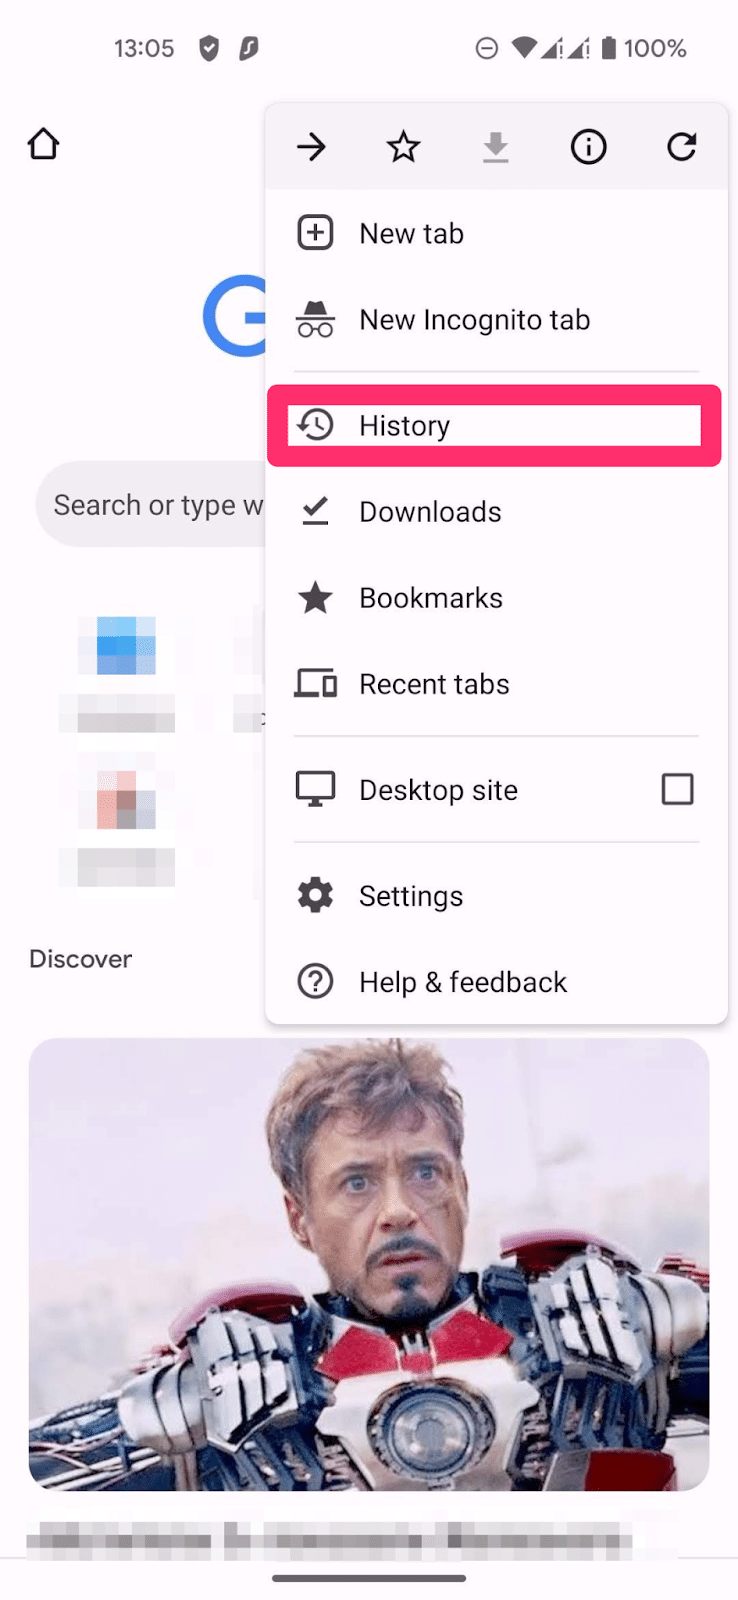 Click on the three dots menu and select the "History" section